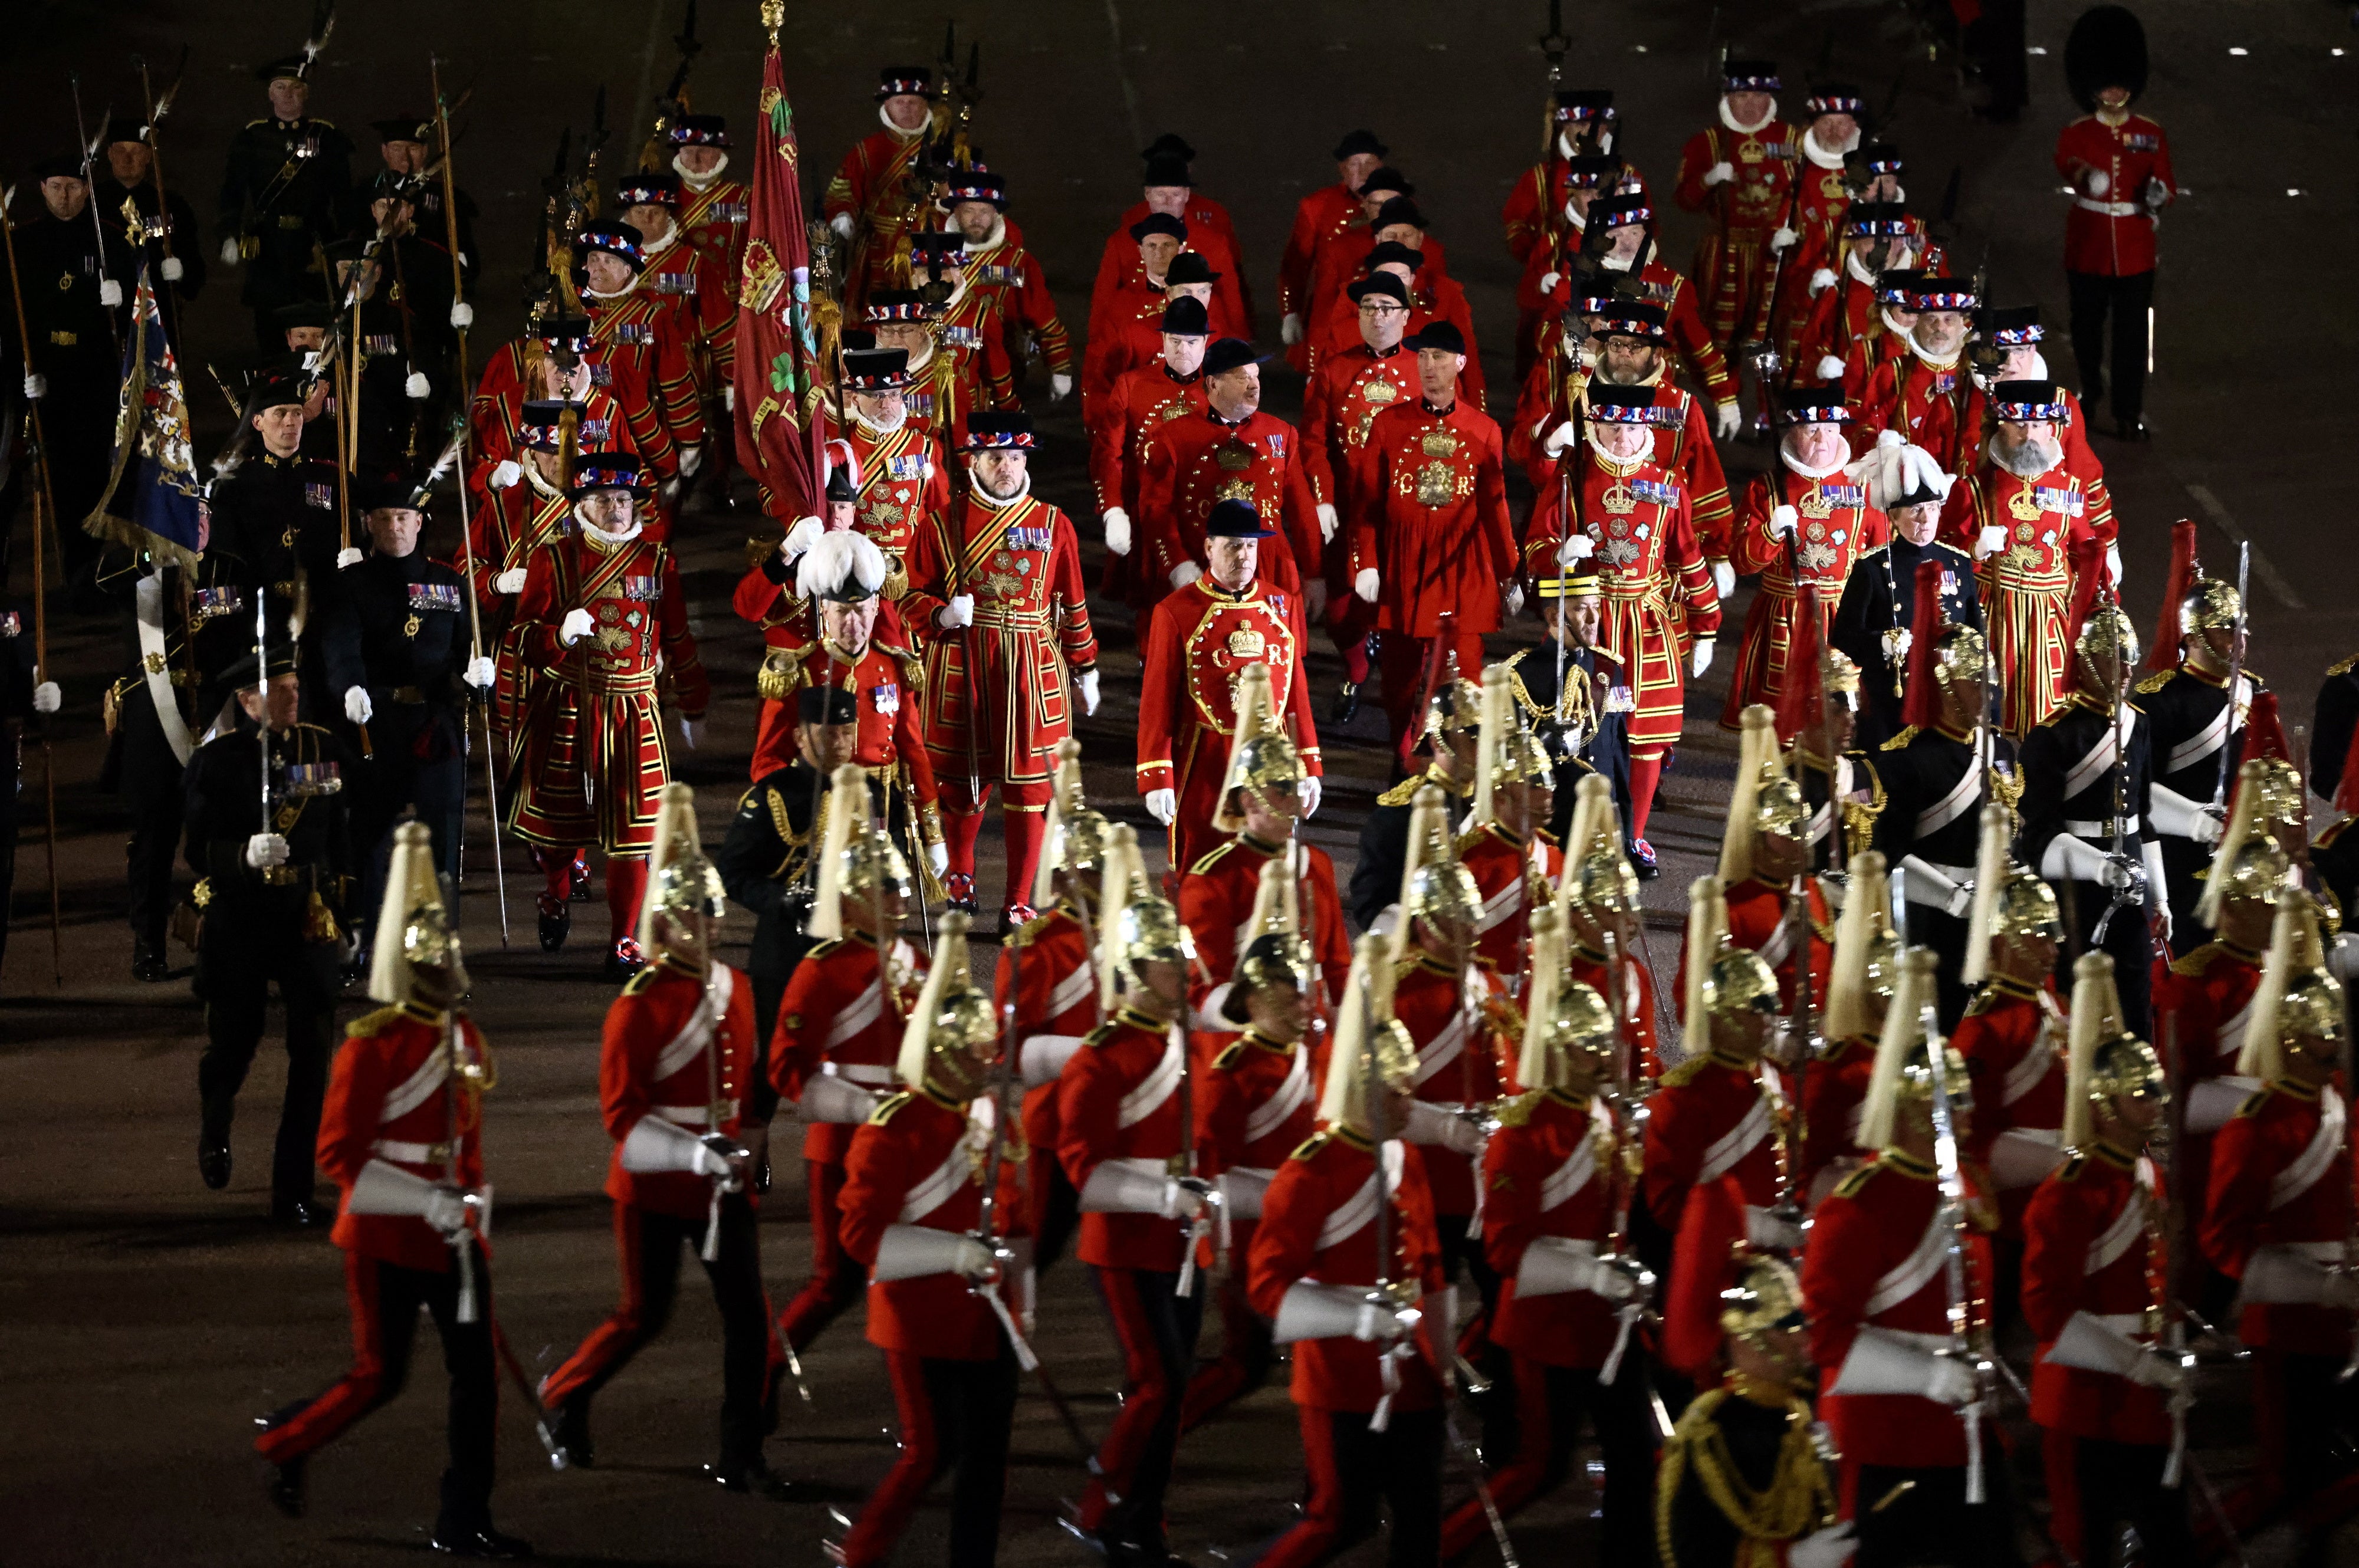 Members of the military take part in a full overnight dress rehearsal of the coronation ceremony